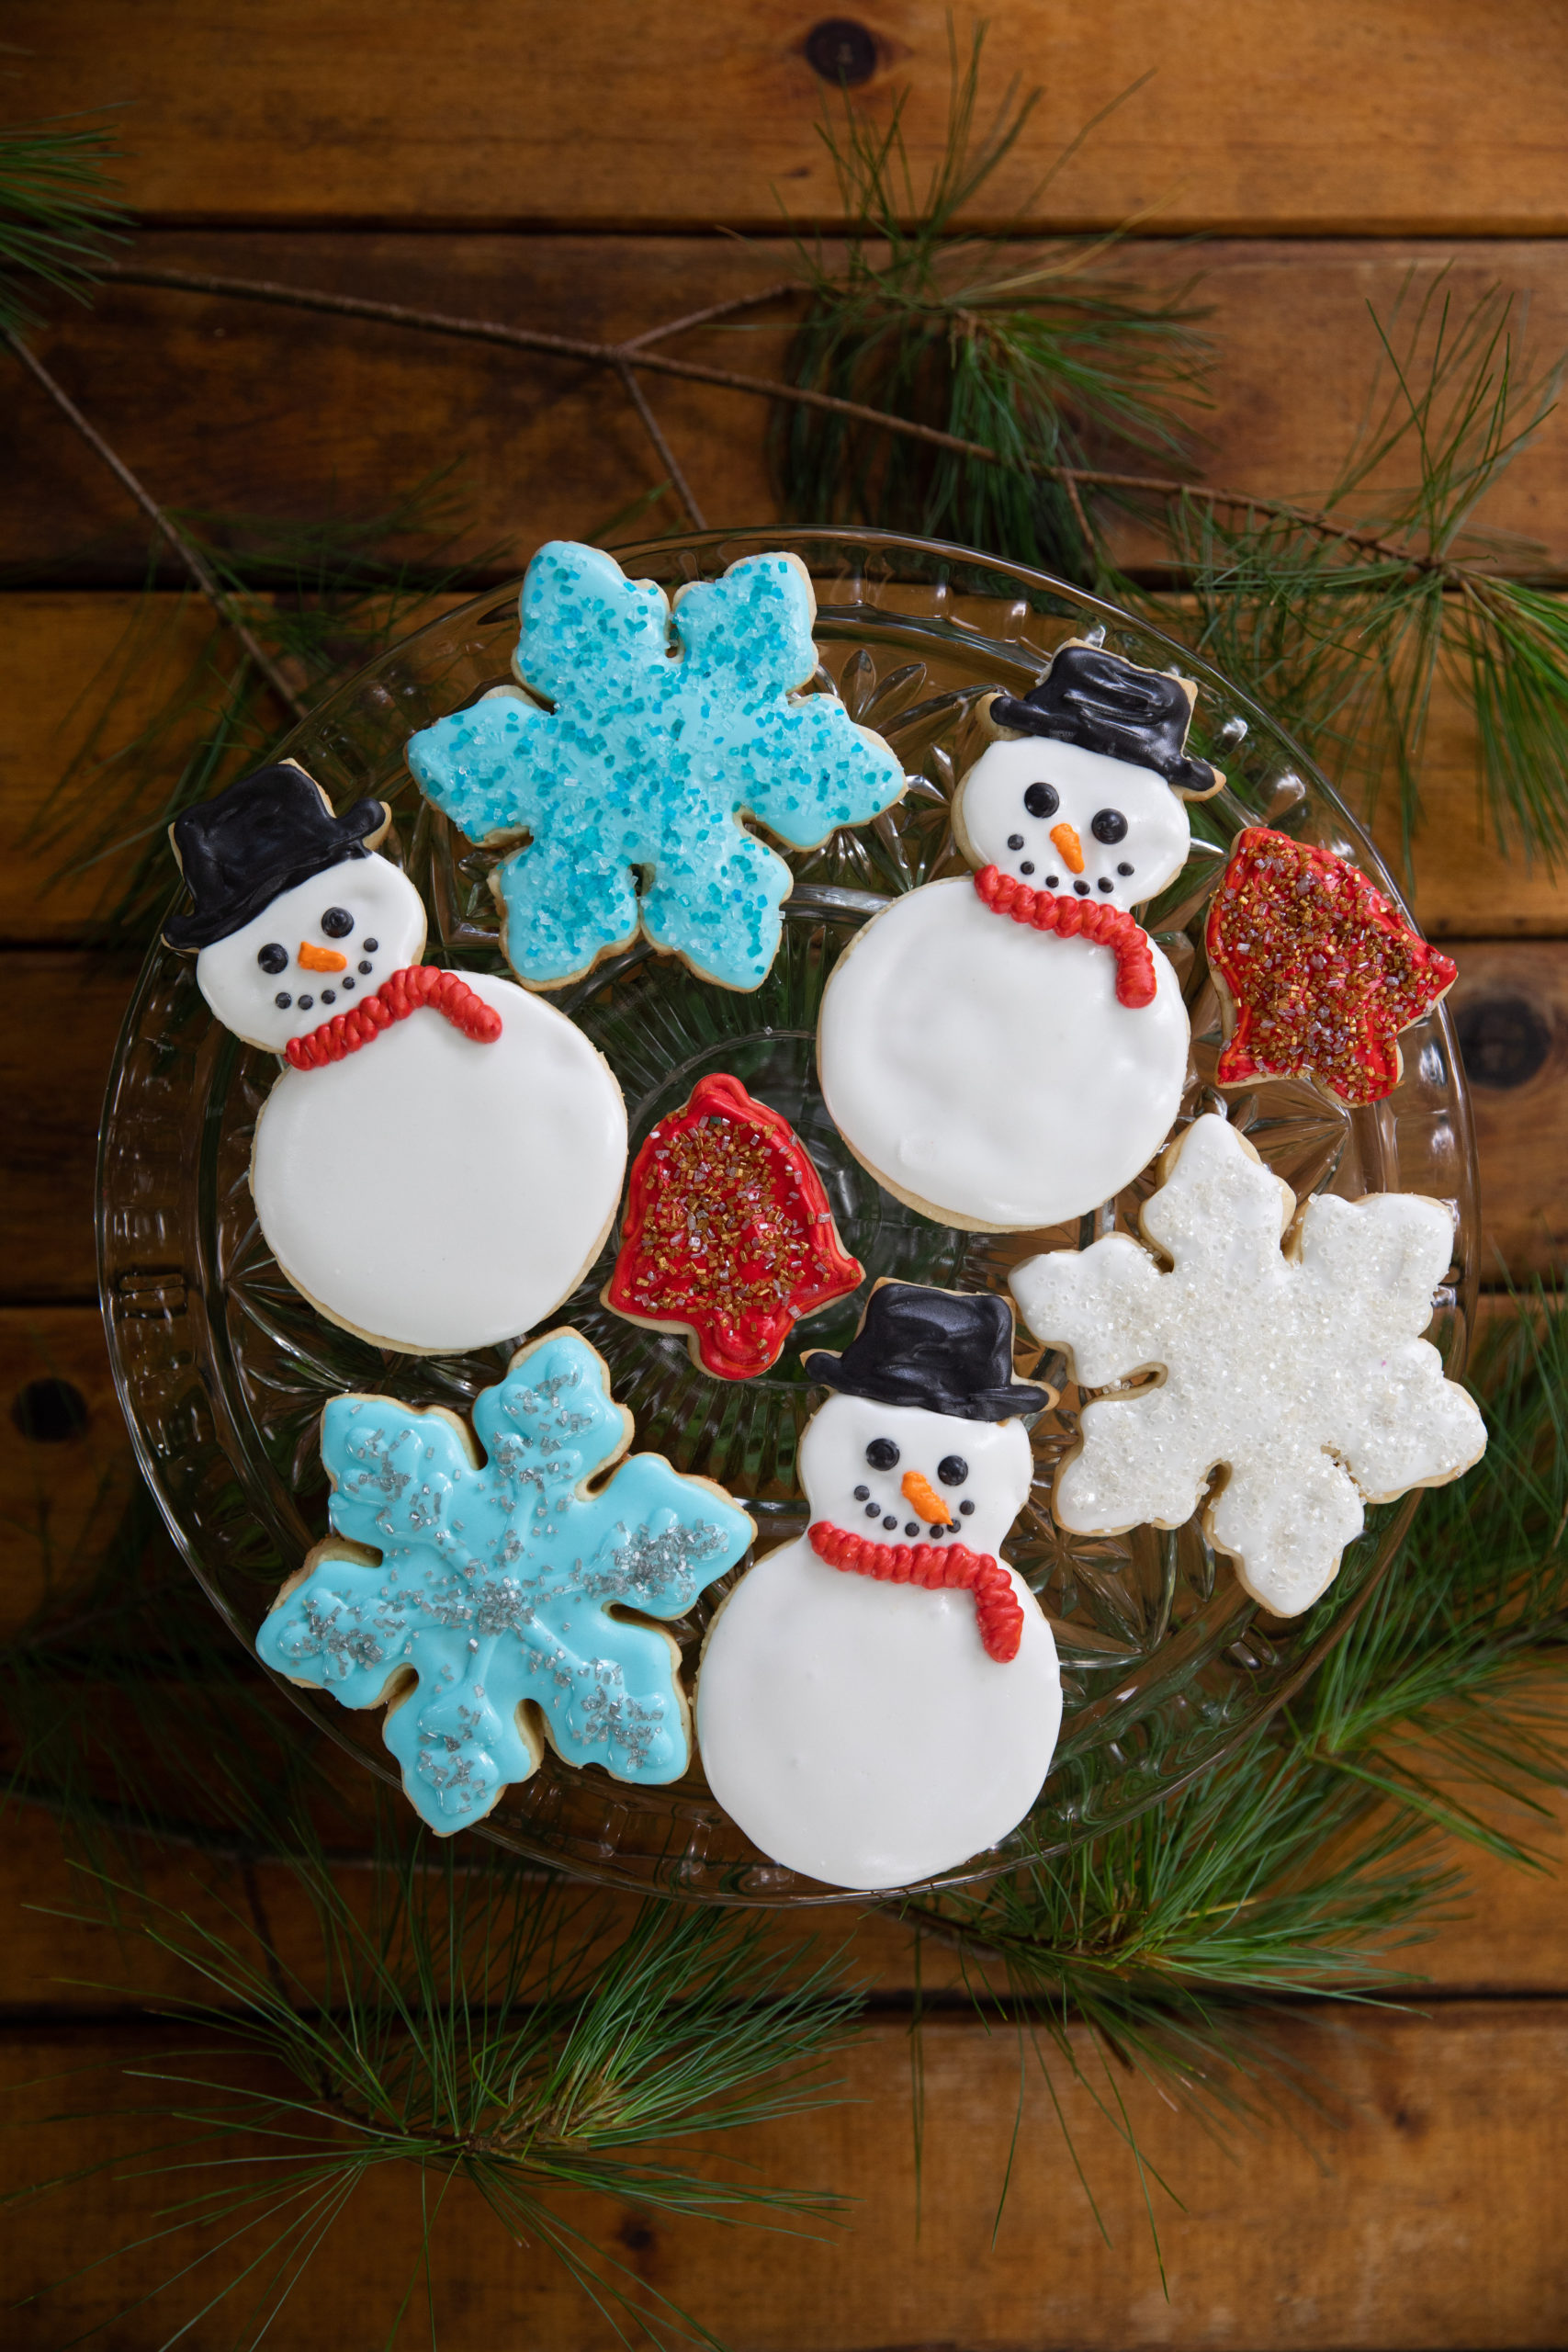 Festive sugar cookies from the Loaves and Fishes Farm Series of cookbooks.